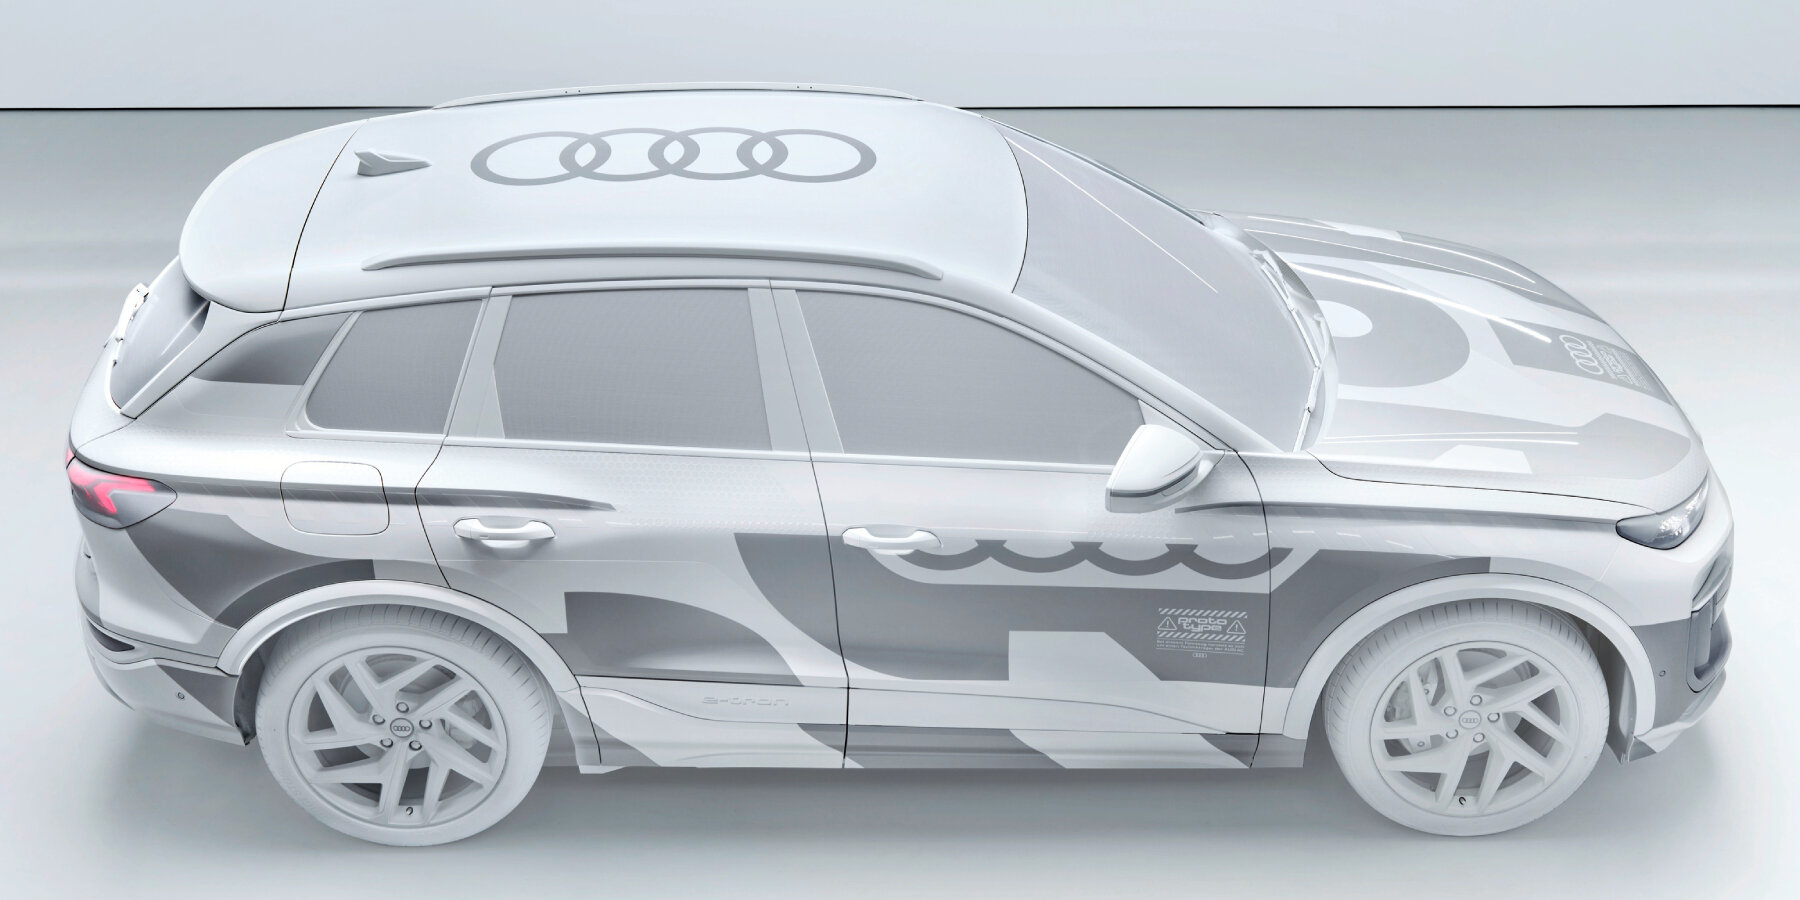 AUDI Q6 e-tron projects driving information on front windshield using ...